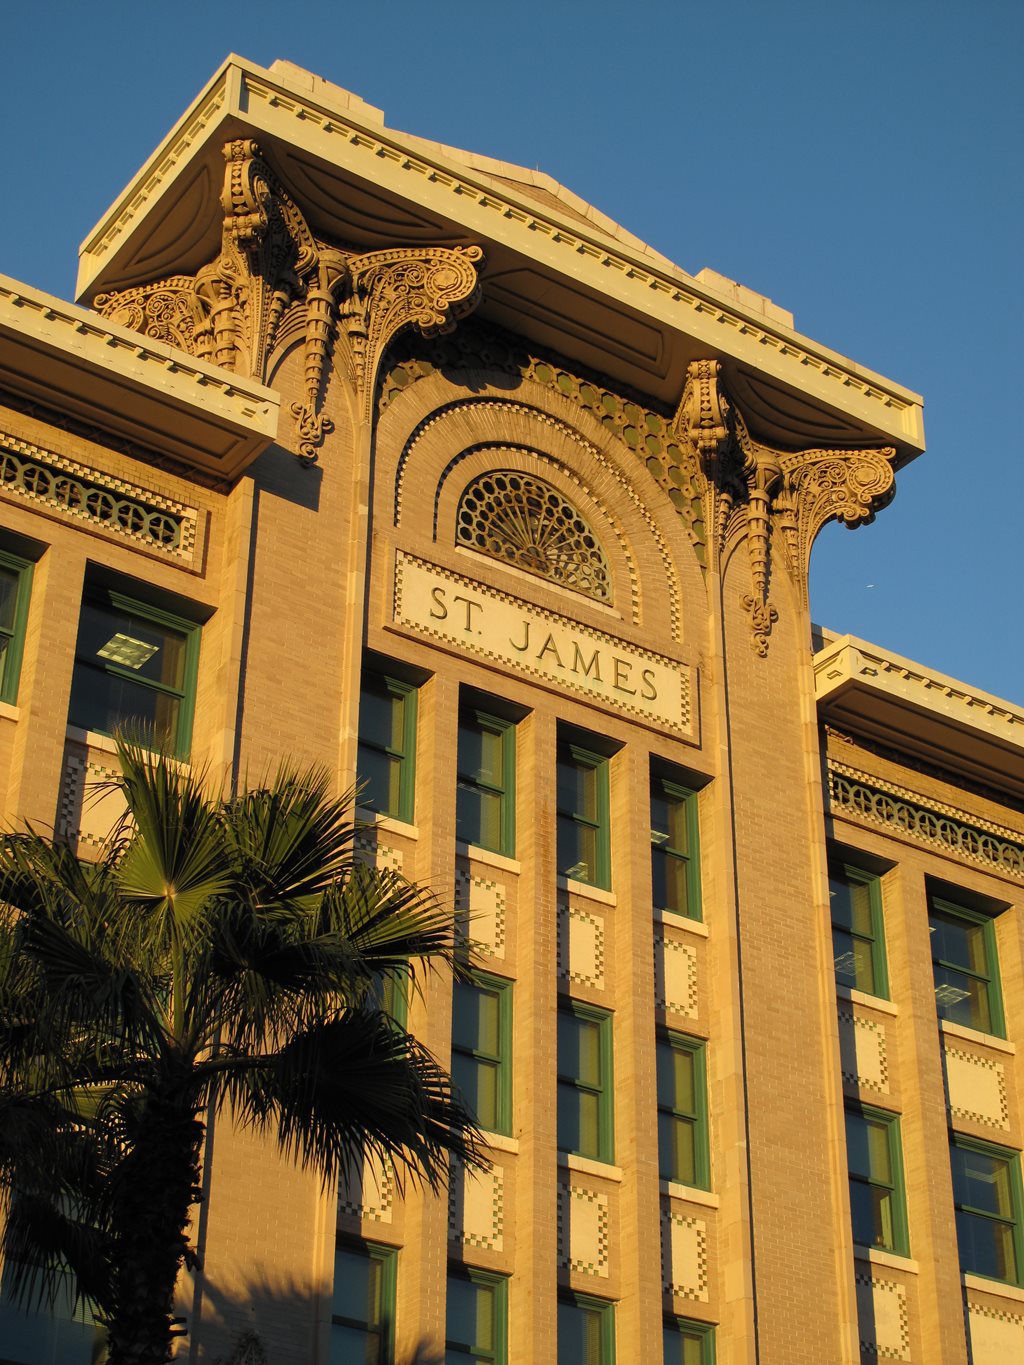 exterior shot of jacksonville city hall building